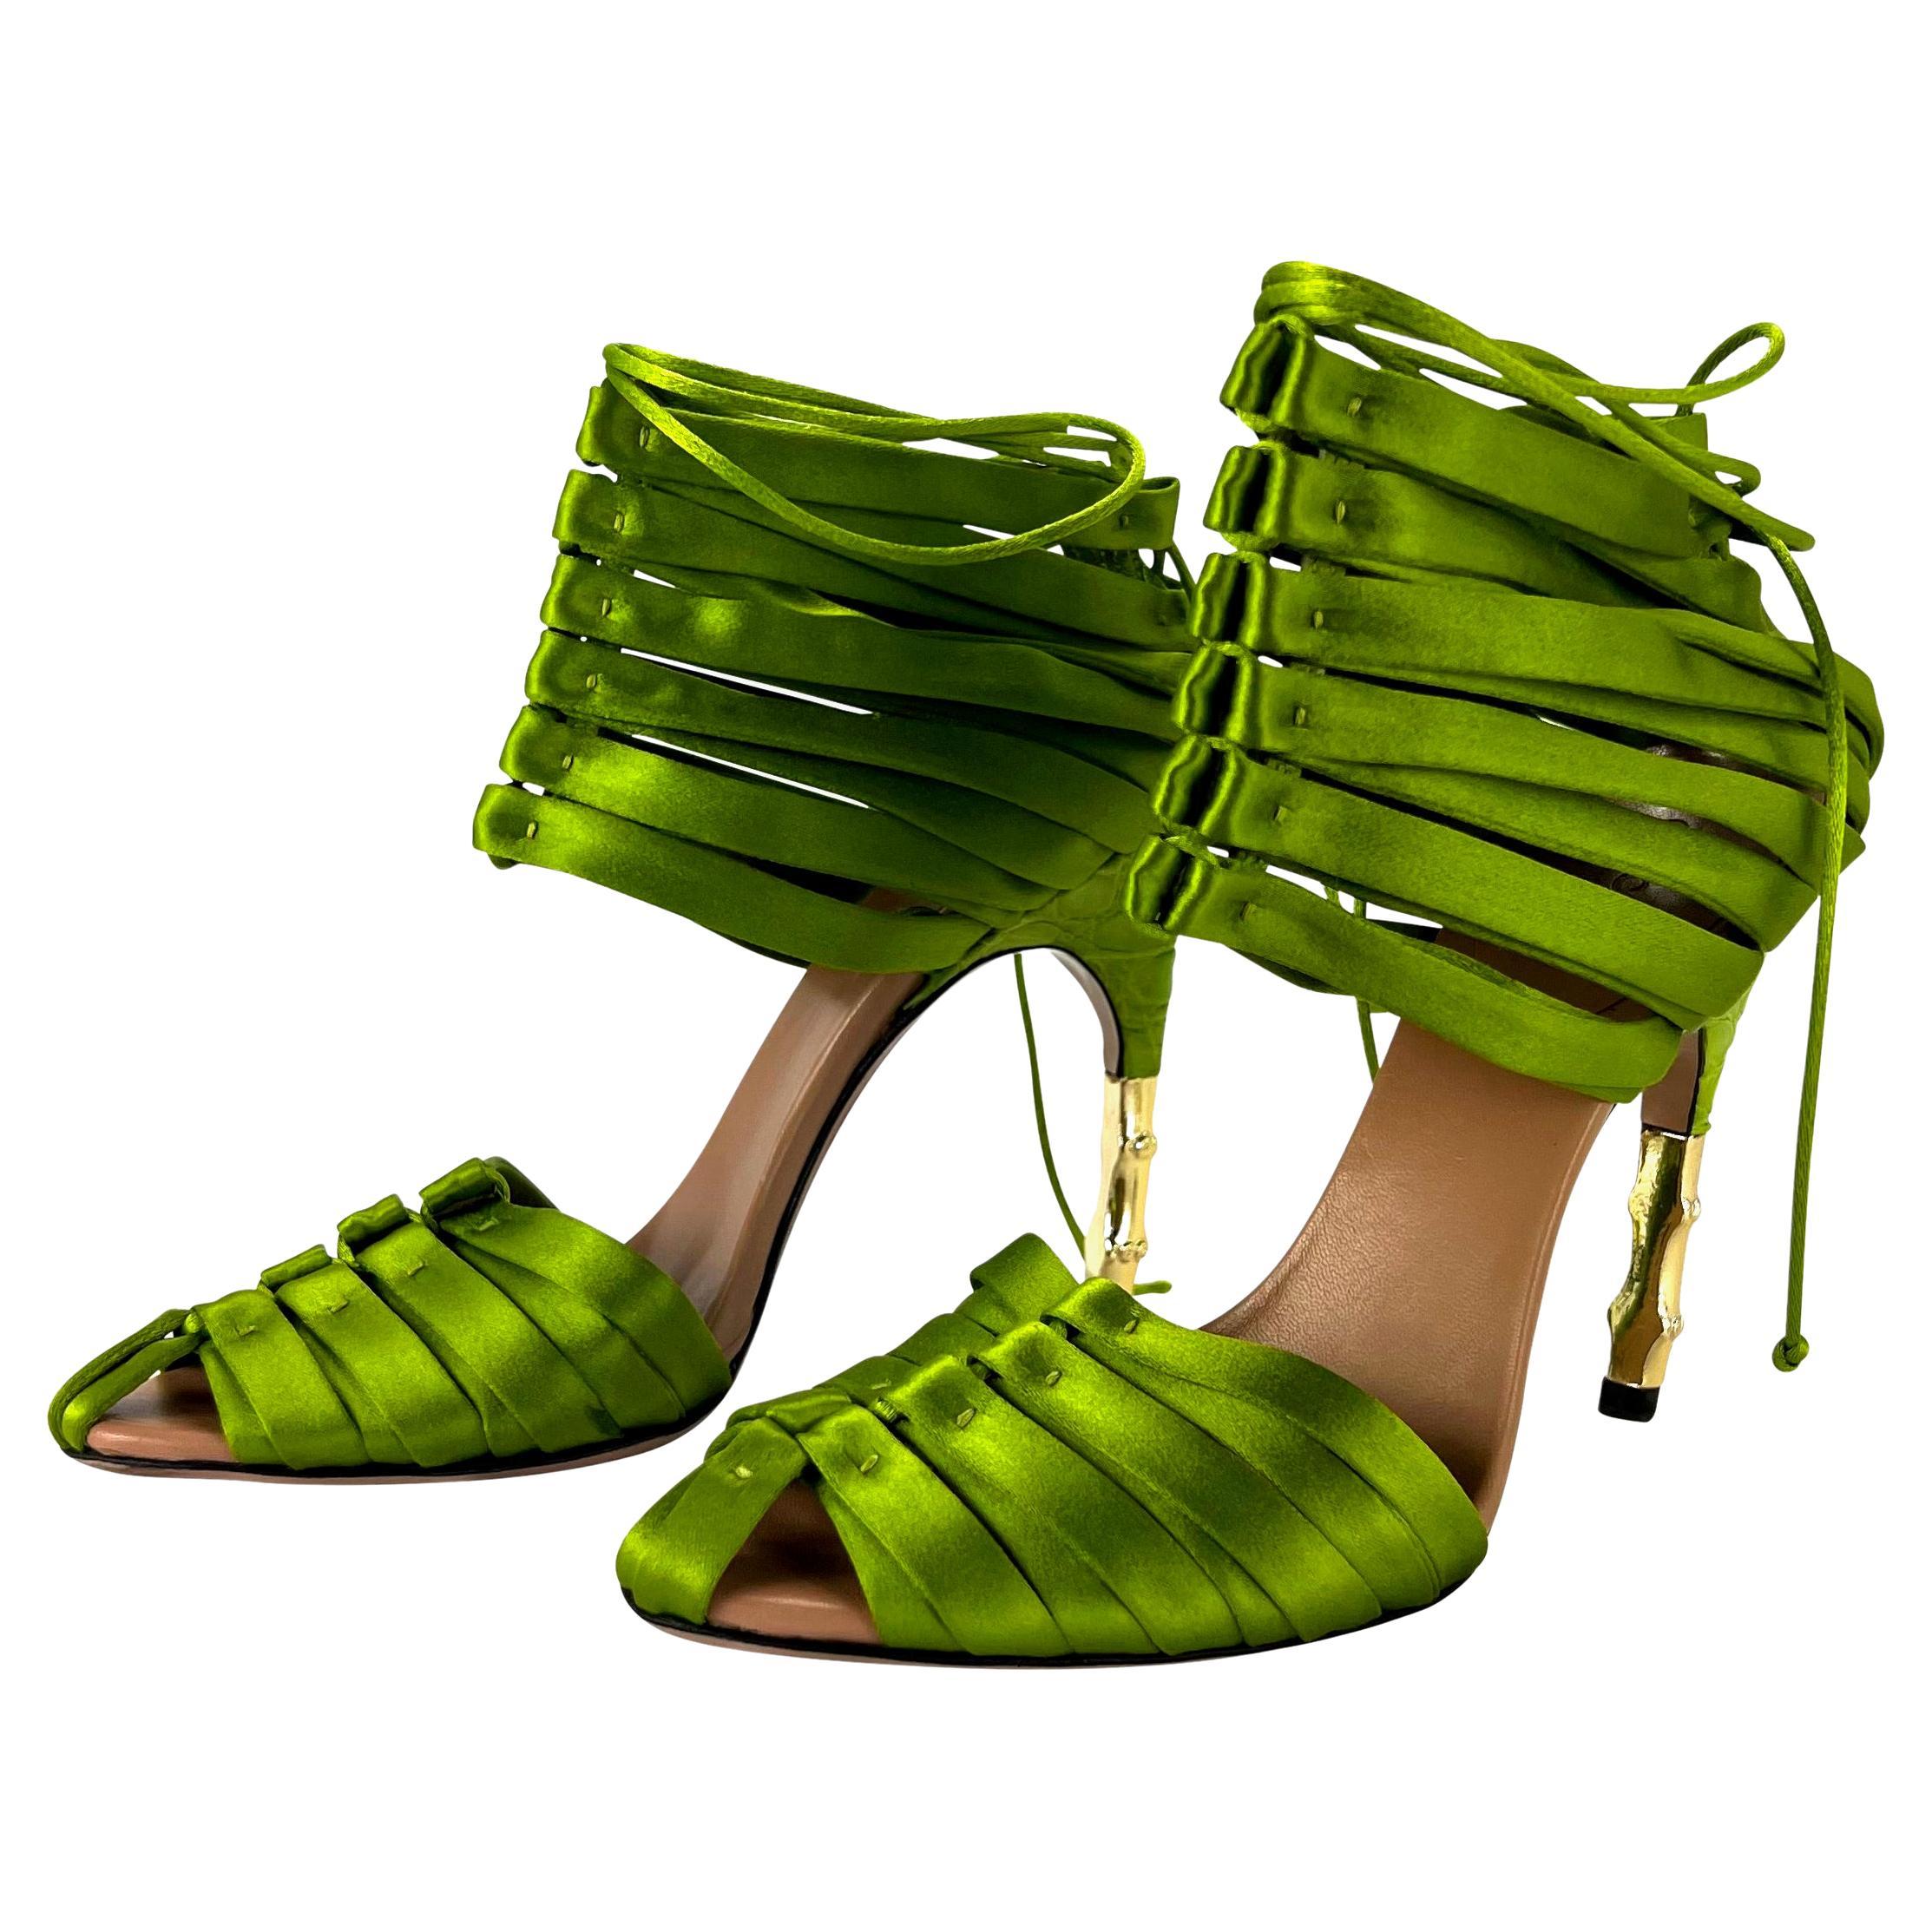 S/S 2004 Gucci by Tom Ford Ad Green Satin Strap Lace-Up Crocodile Heels Size 5 B In Excellent Condition For Sale In West Hollywood, CA